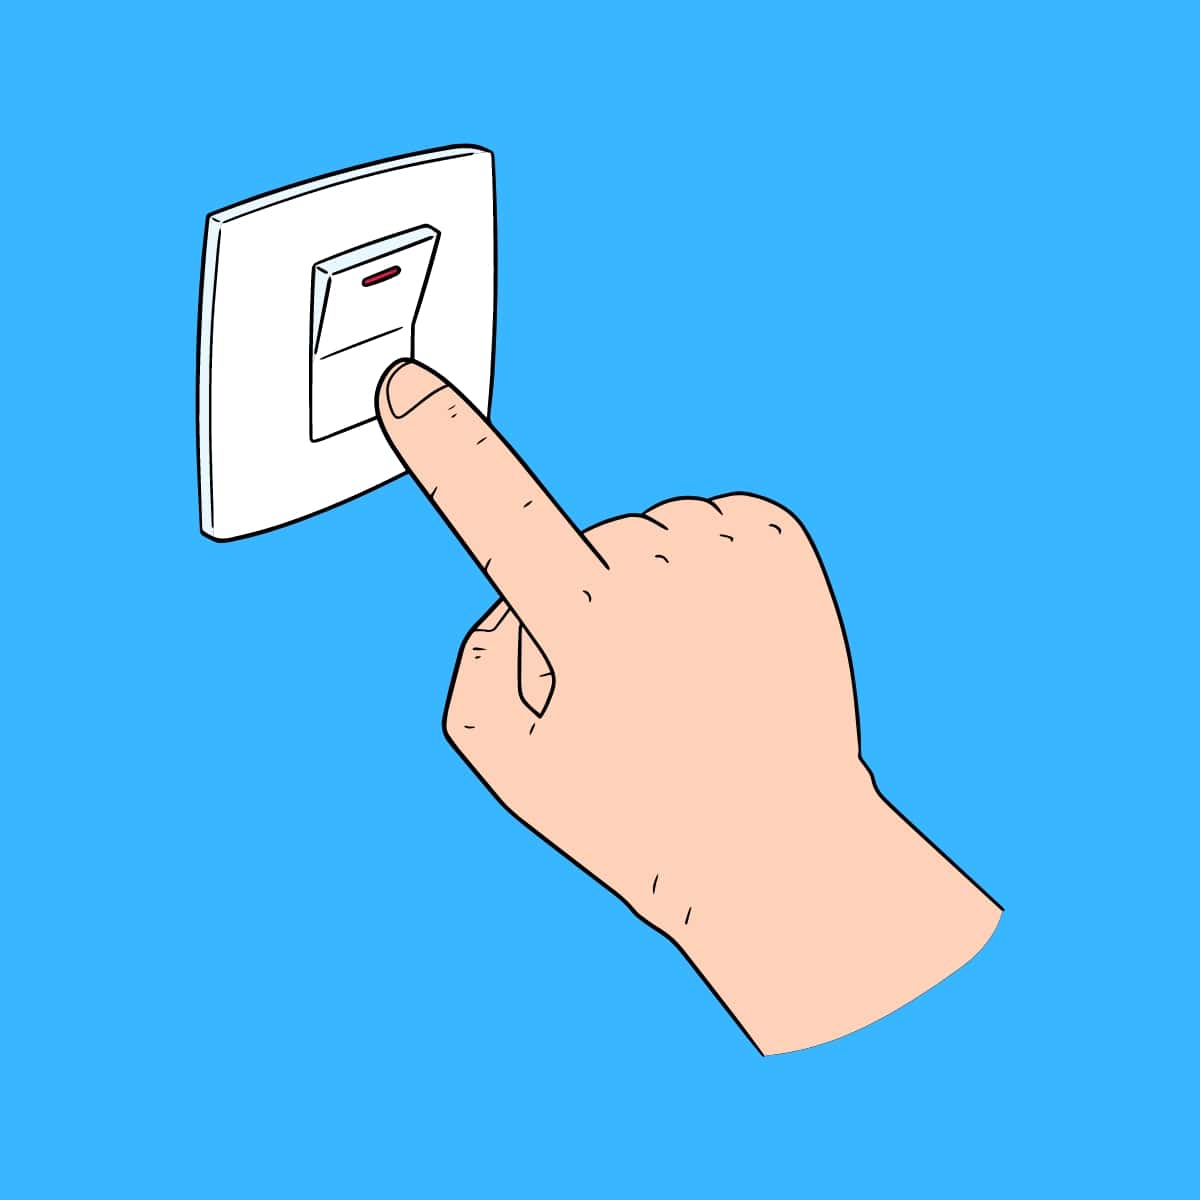 Cartoon graphic of a hand pushing a button switch on a blue background.